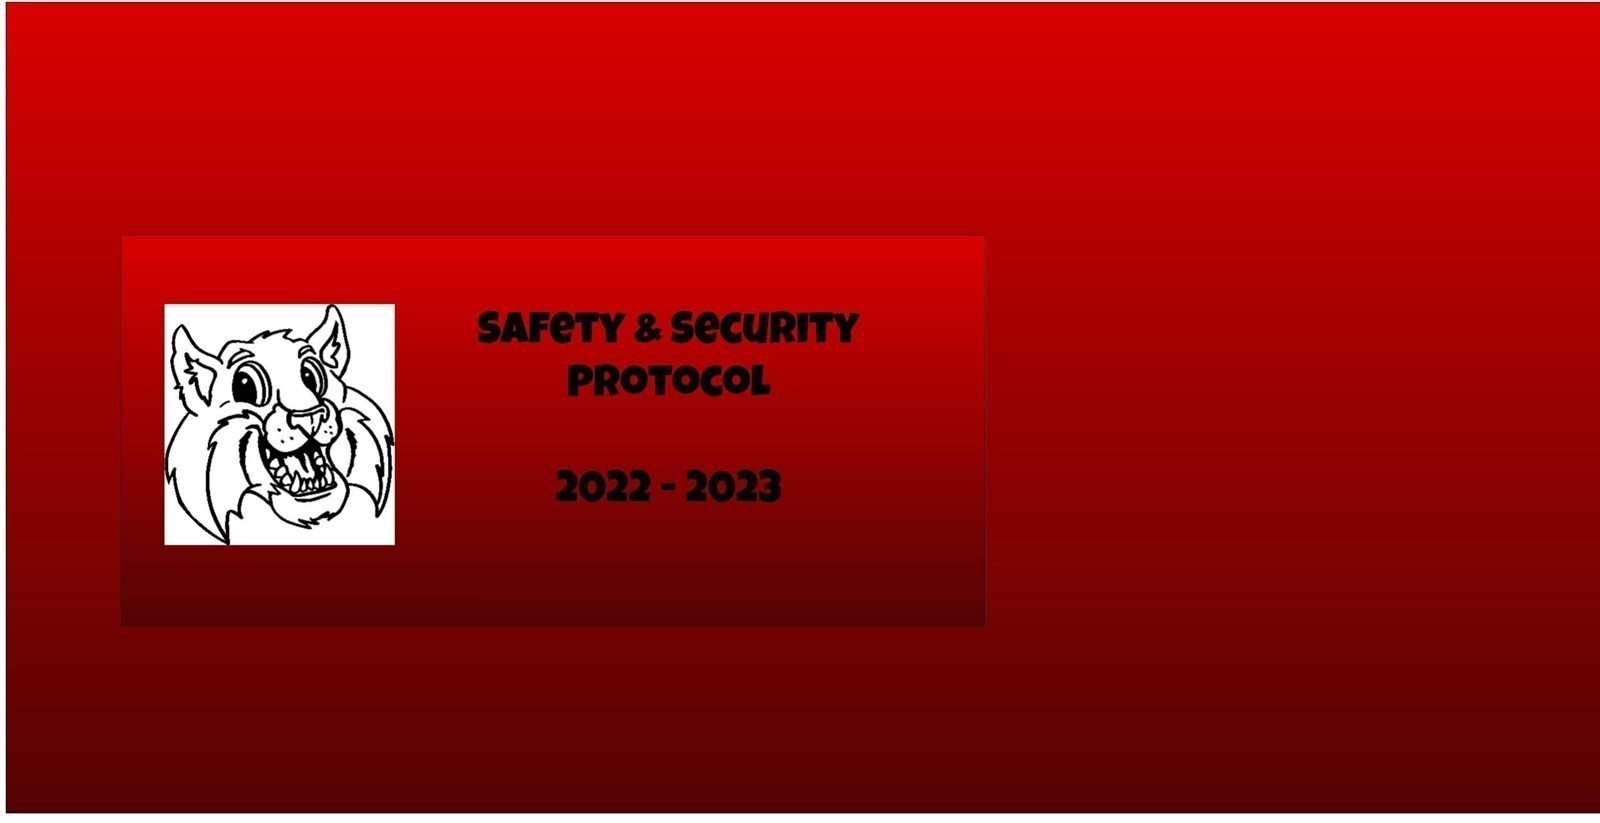 Safety & Security Protocol